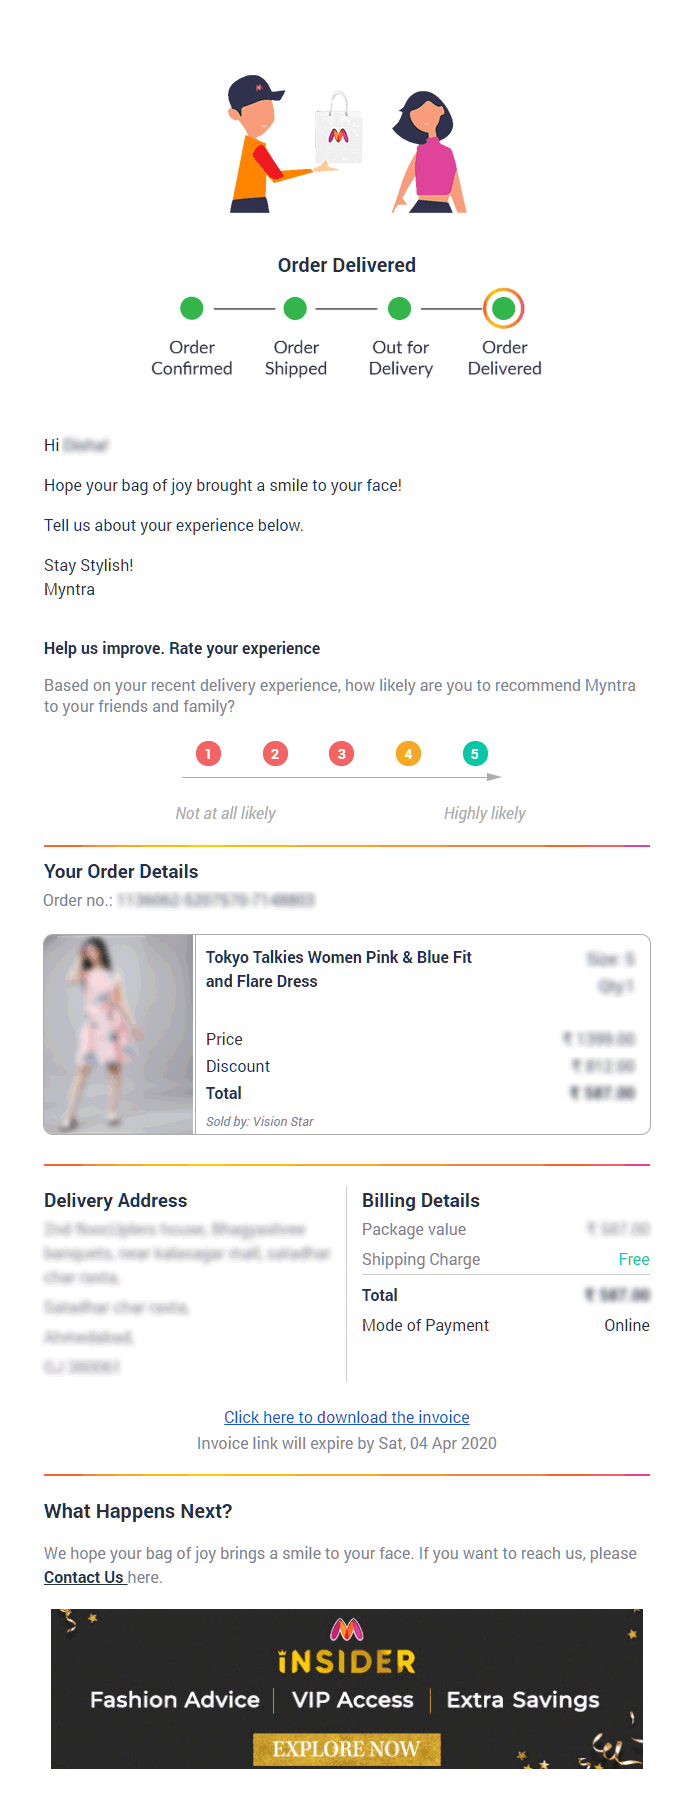 Myntra Delivered Notification Email Template screenshot